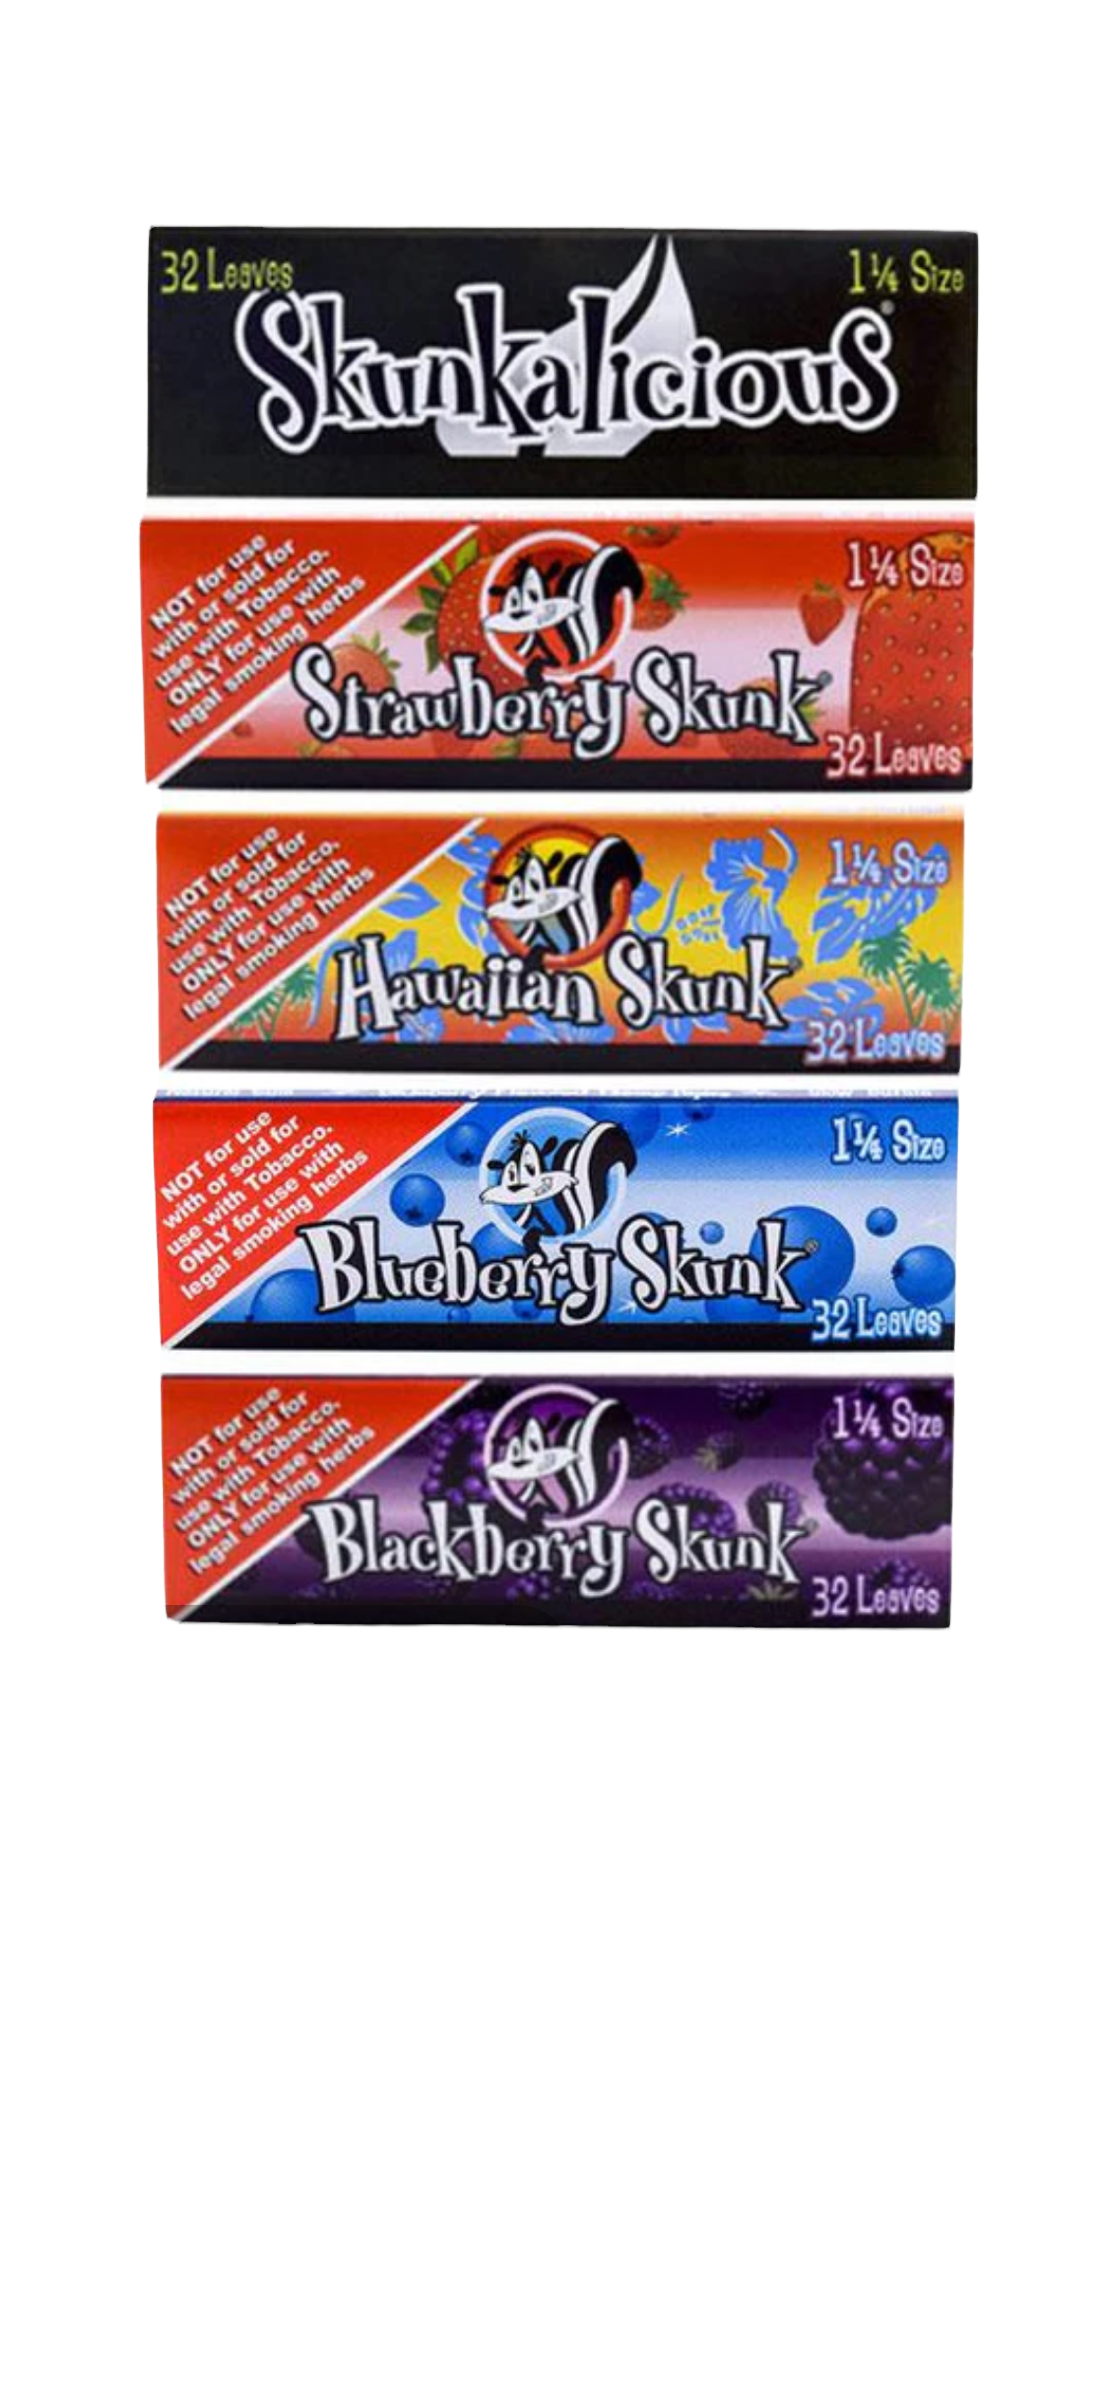 FLAVORED SKUNK PAPERS | 1 1/4 SIZE | 24 BOOKLETS